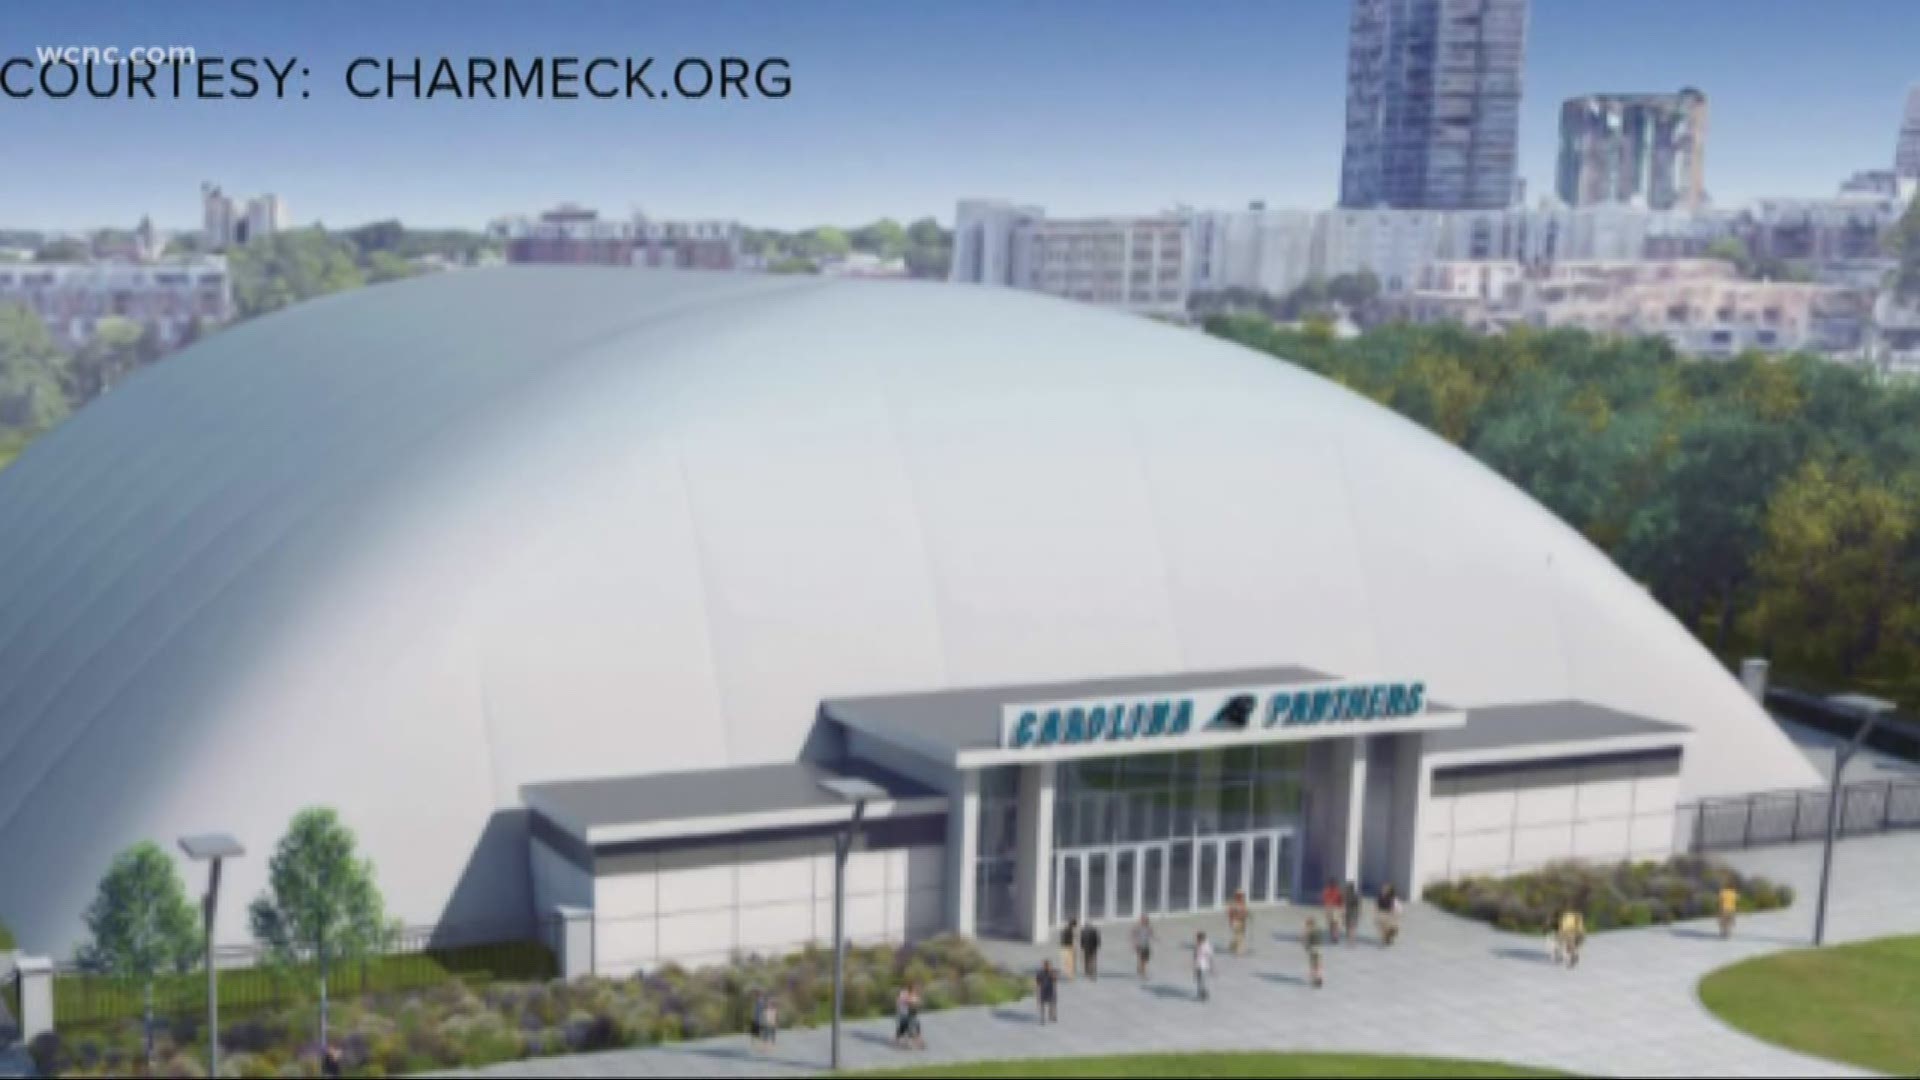 The new domed facility will allow the Panthers to practice no matter what the weather.